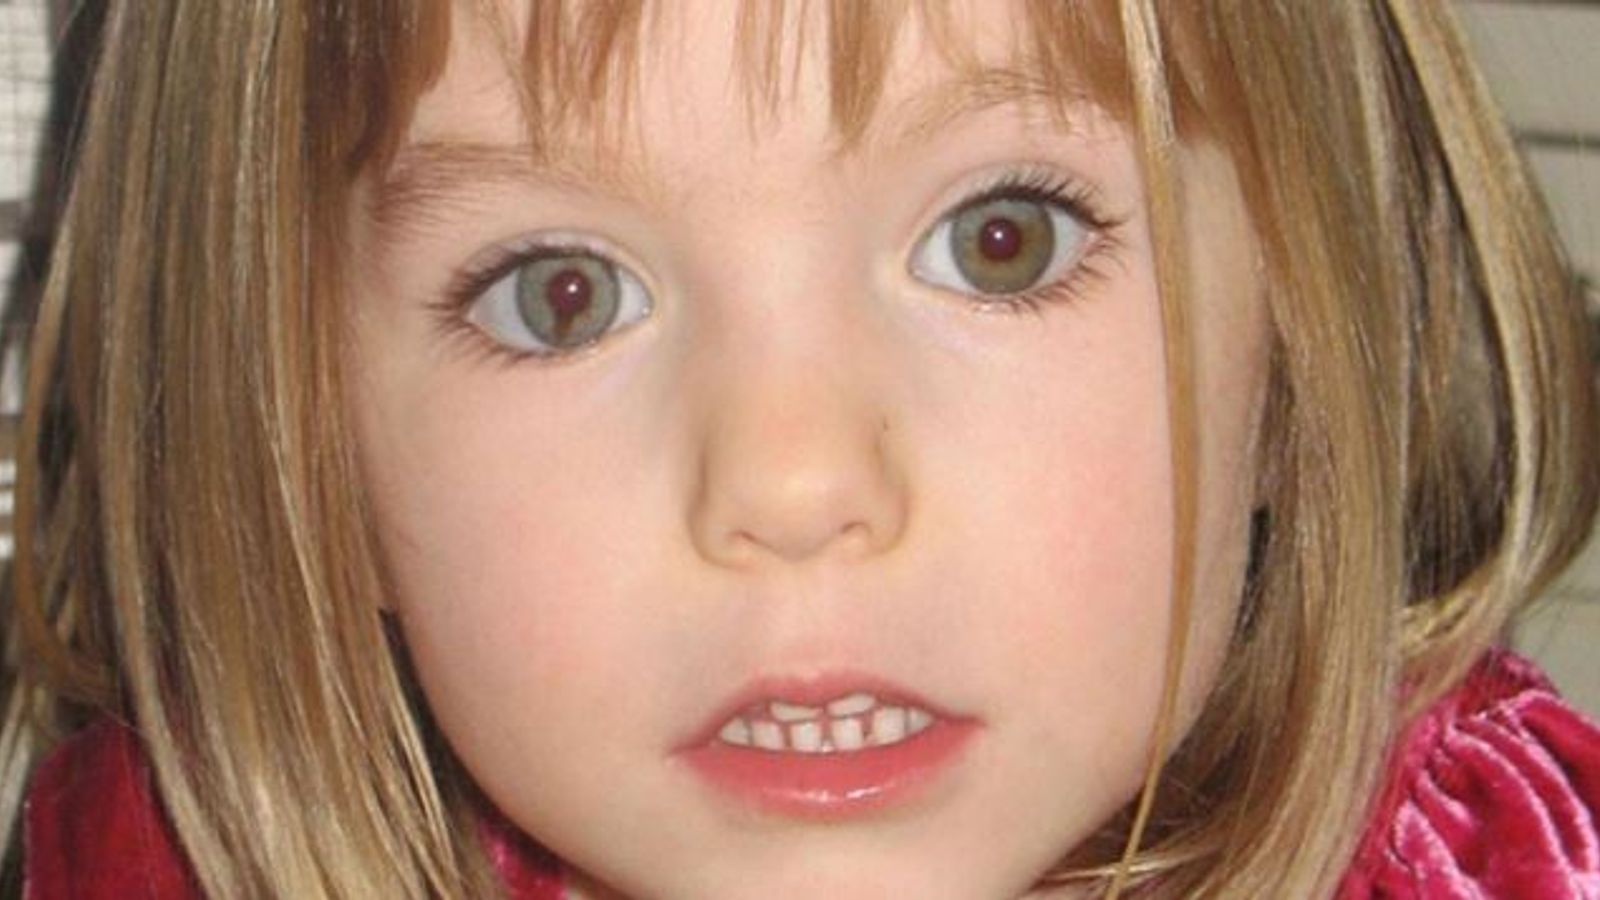 Police investigating Madeleine McCann disappearance to search reservoir in Portugal, Sky News understands